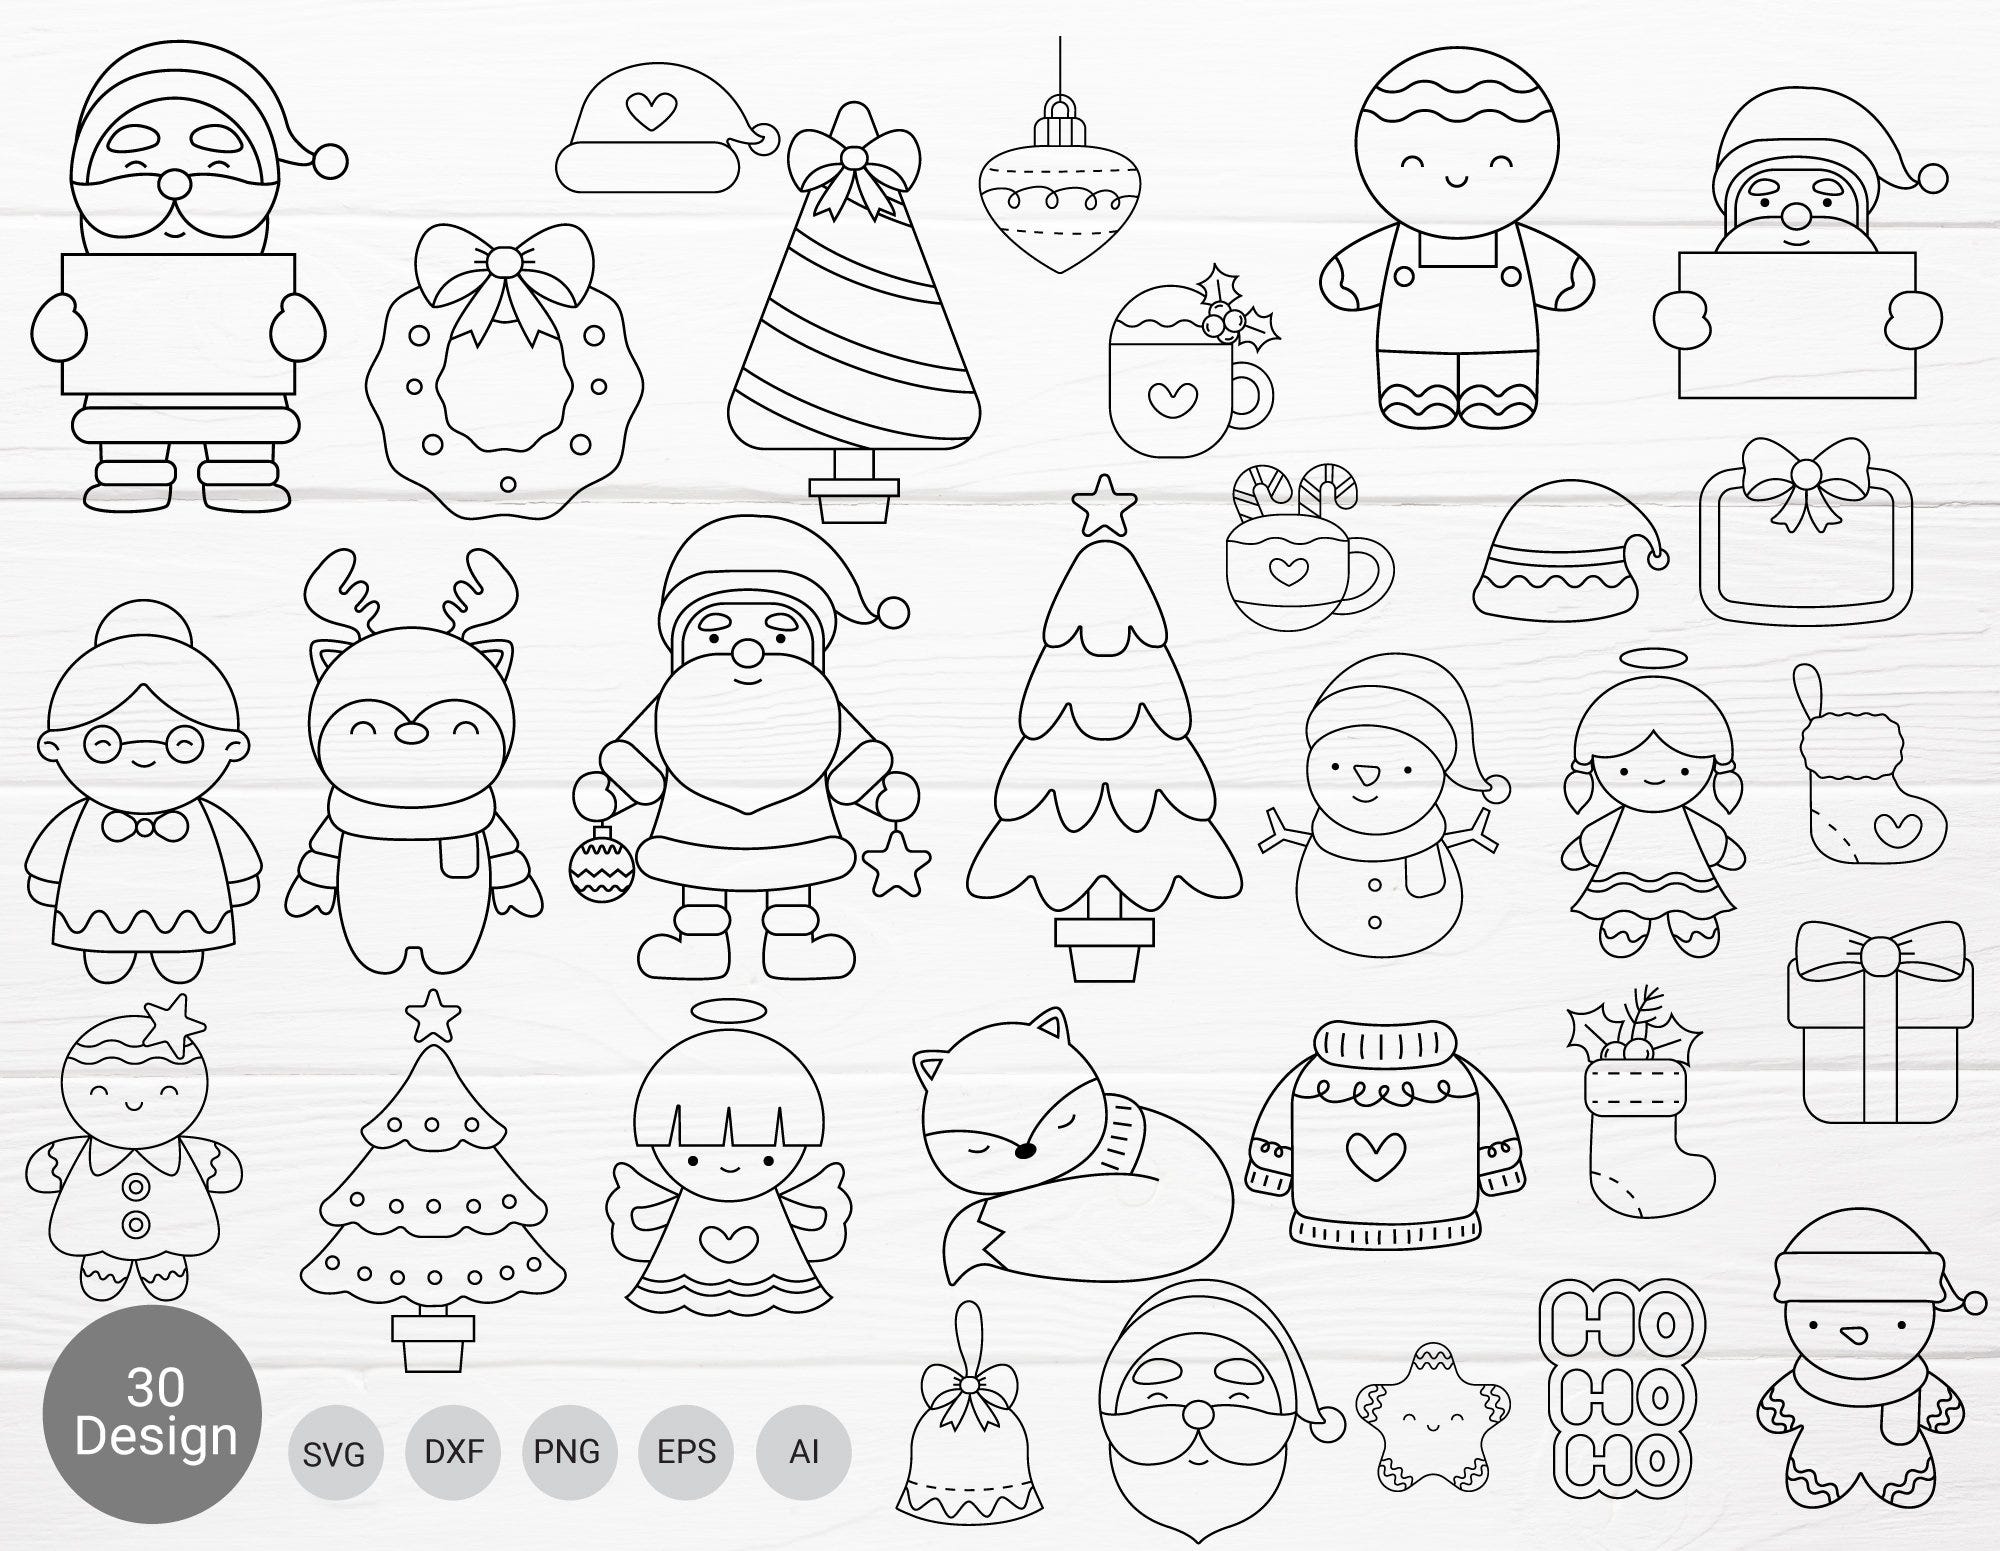 30 Christmas Bundle SVG For Cut File,Animal, Christmas Tree,ornaments Doodle,hand drawn,Cartoon, svg,dxf,png,eps, cricut Silhouette,Cameo